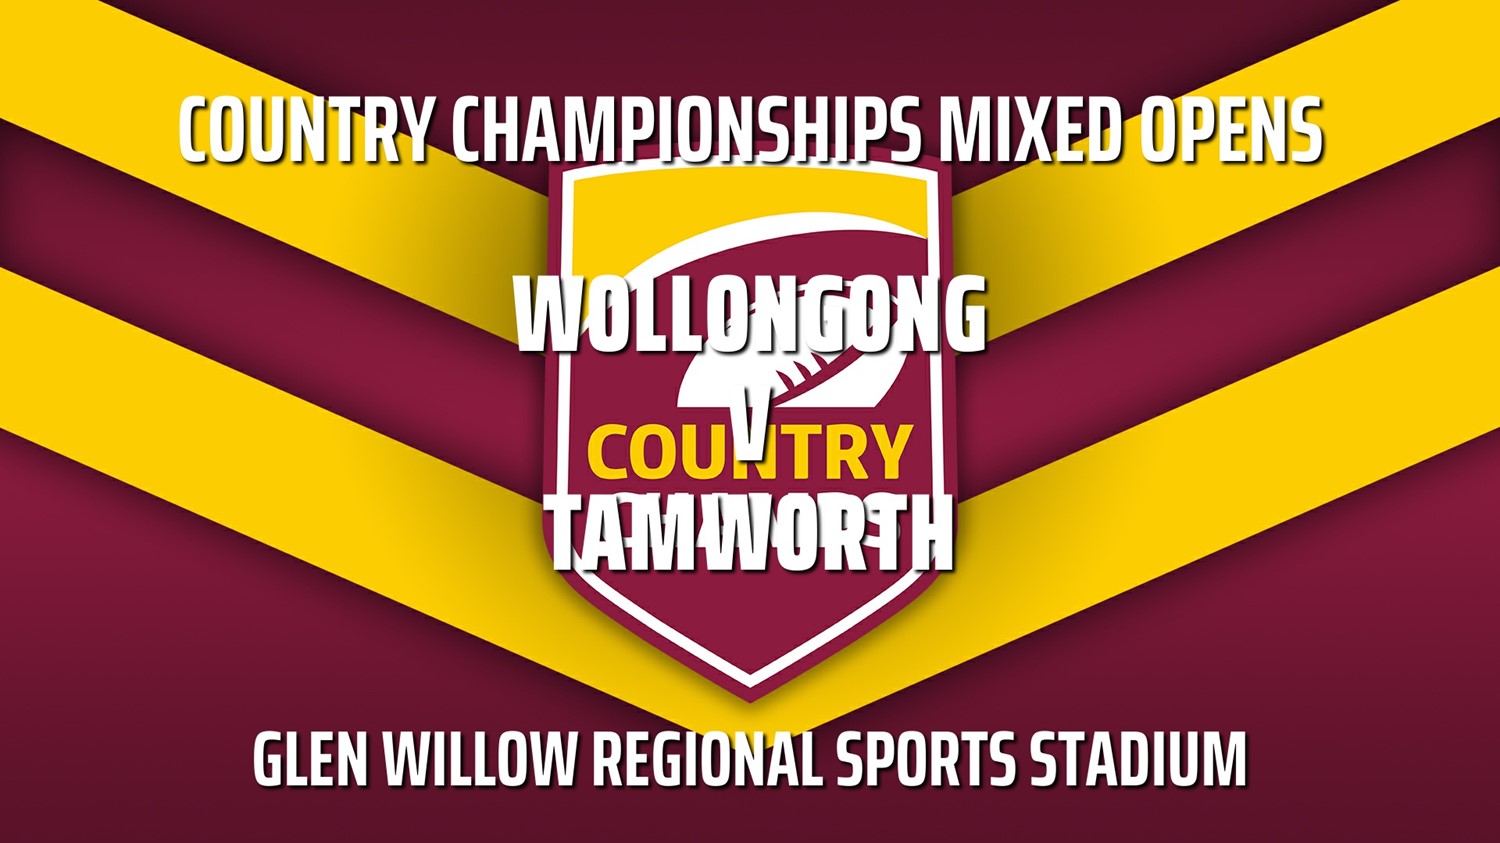 231014-Country Championships Mixed Opens - Wollongong Devils v Tamworth Titans Minigame Slate Image